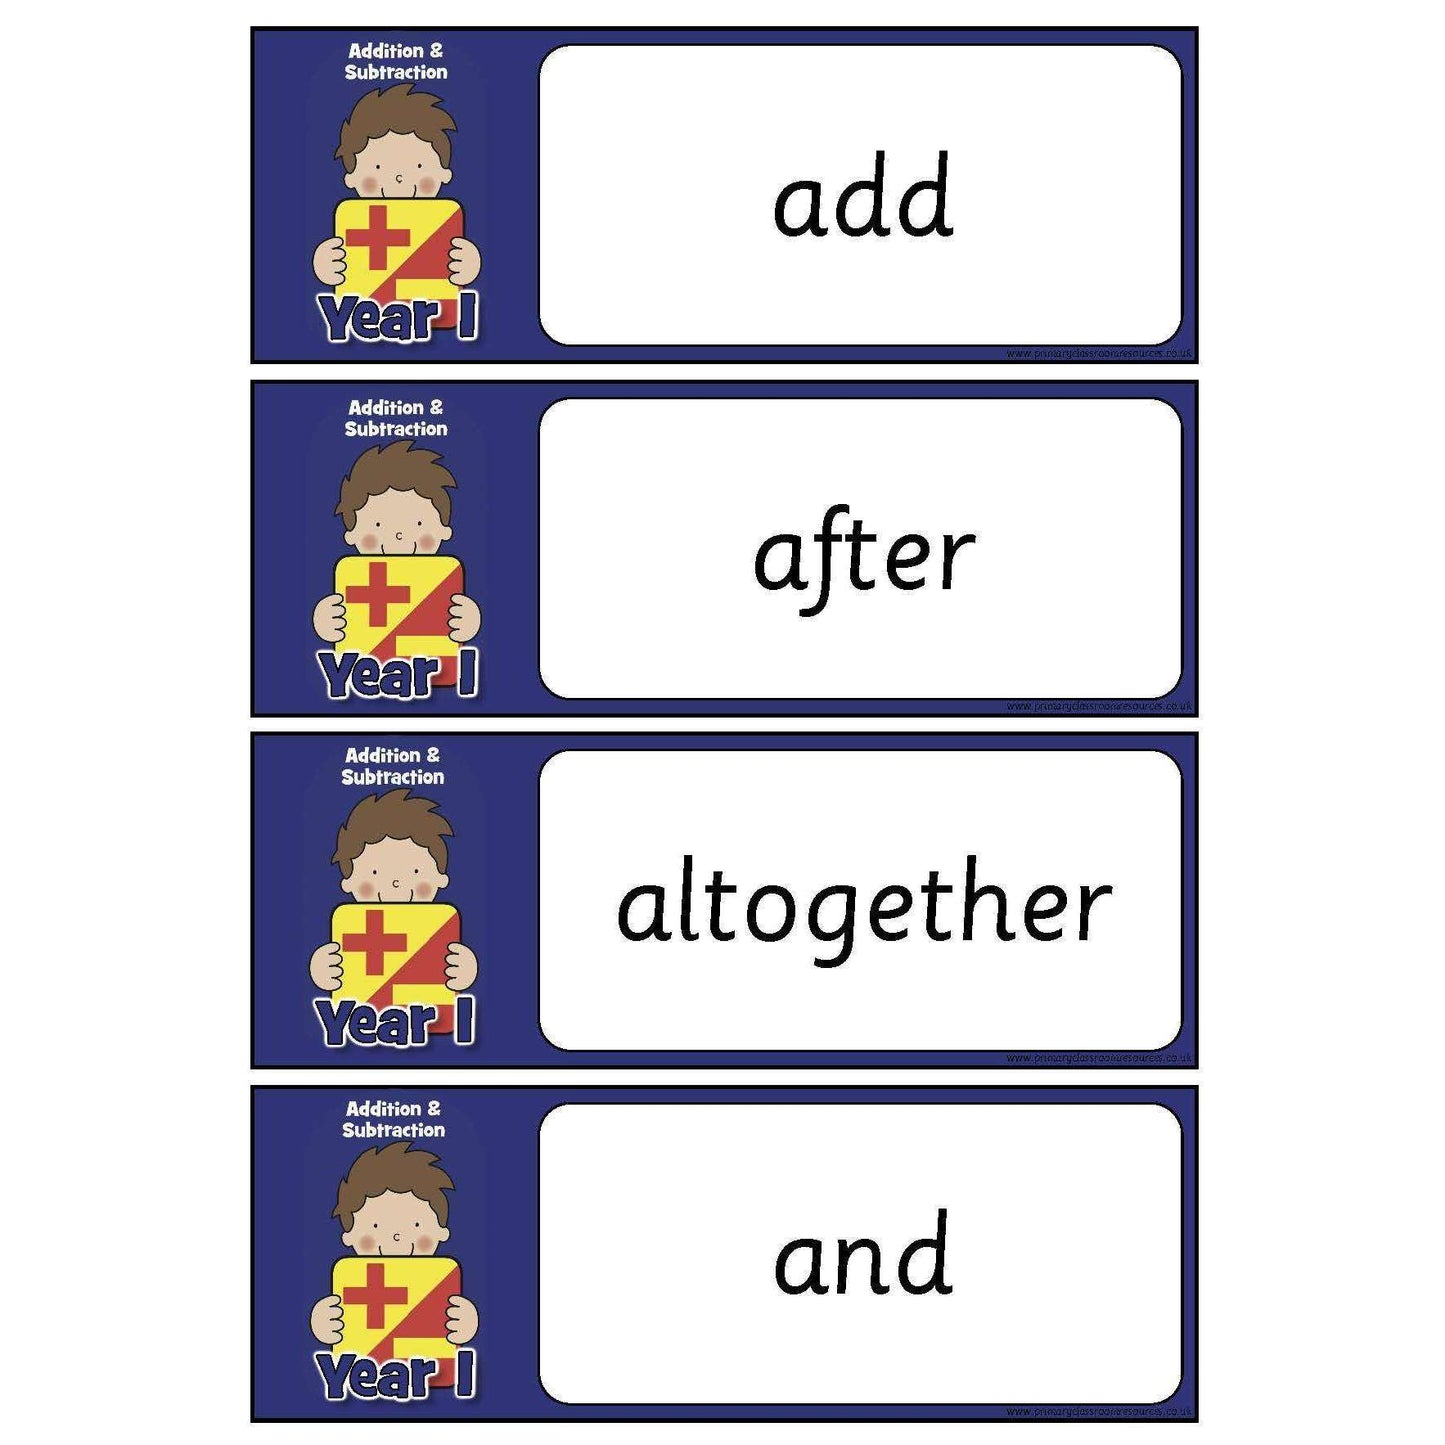 Year 1 Maths Vocabulary - Addition and Subtraction:Primary Classroom Resources